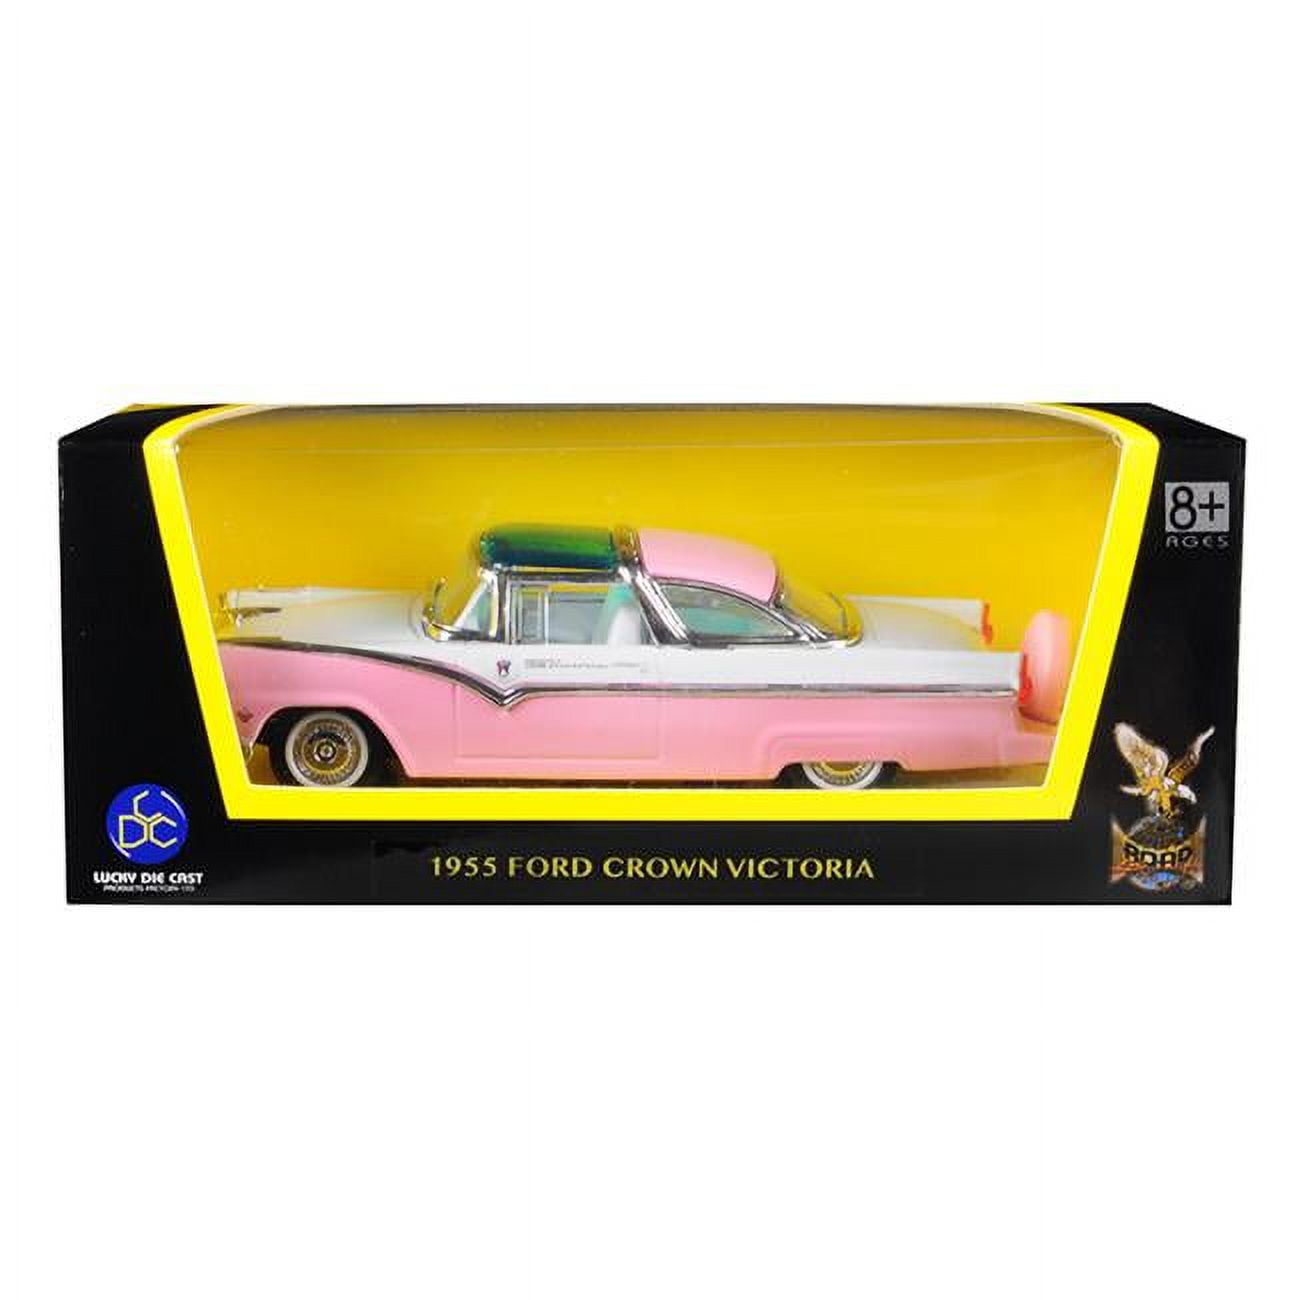 94202pk 1955 Ford Crown Victoria Pink 1-43 Diecast Model Car